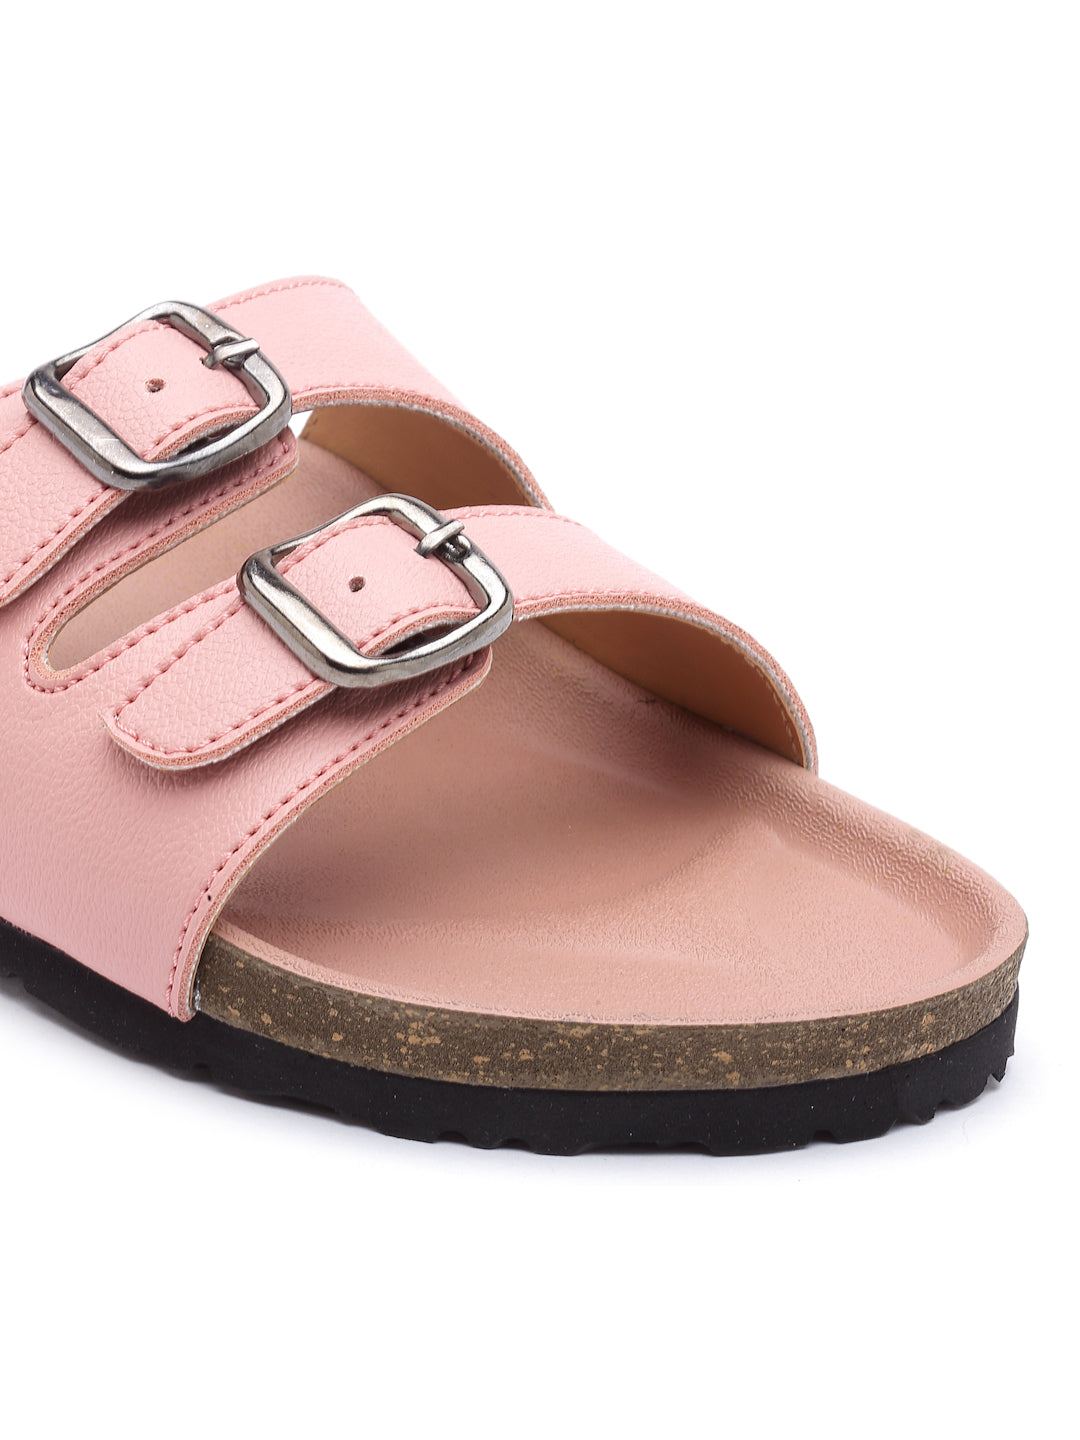 Women's Pink Synthetic Leather Casual Sandal